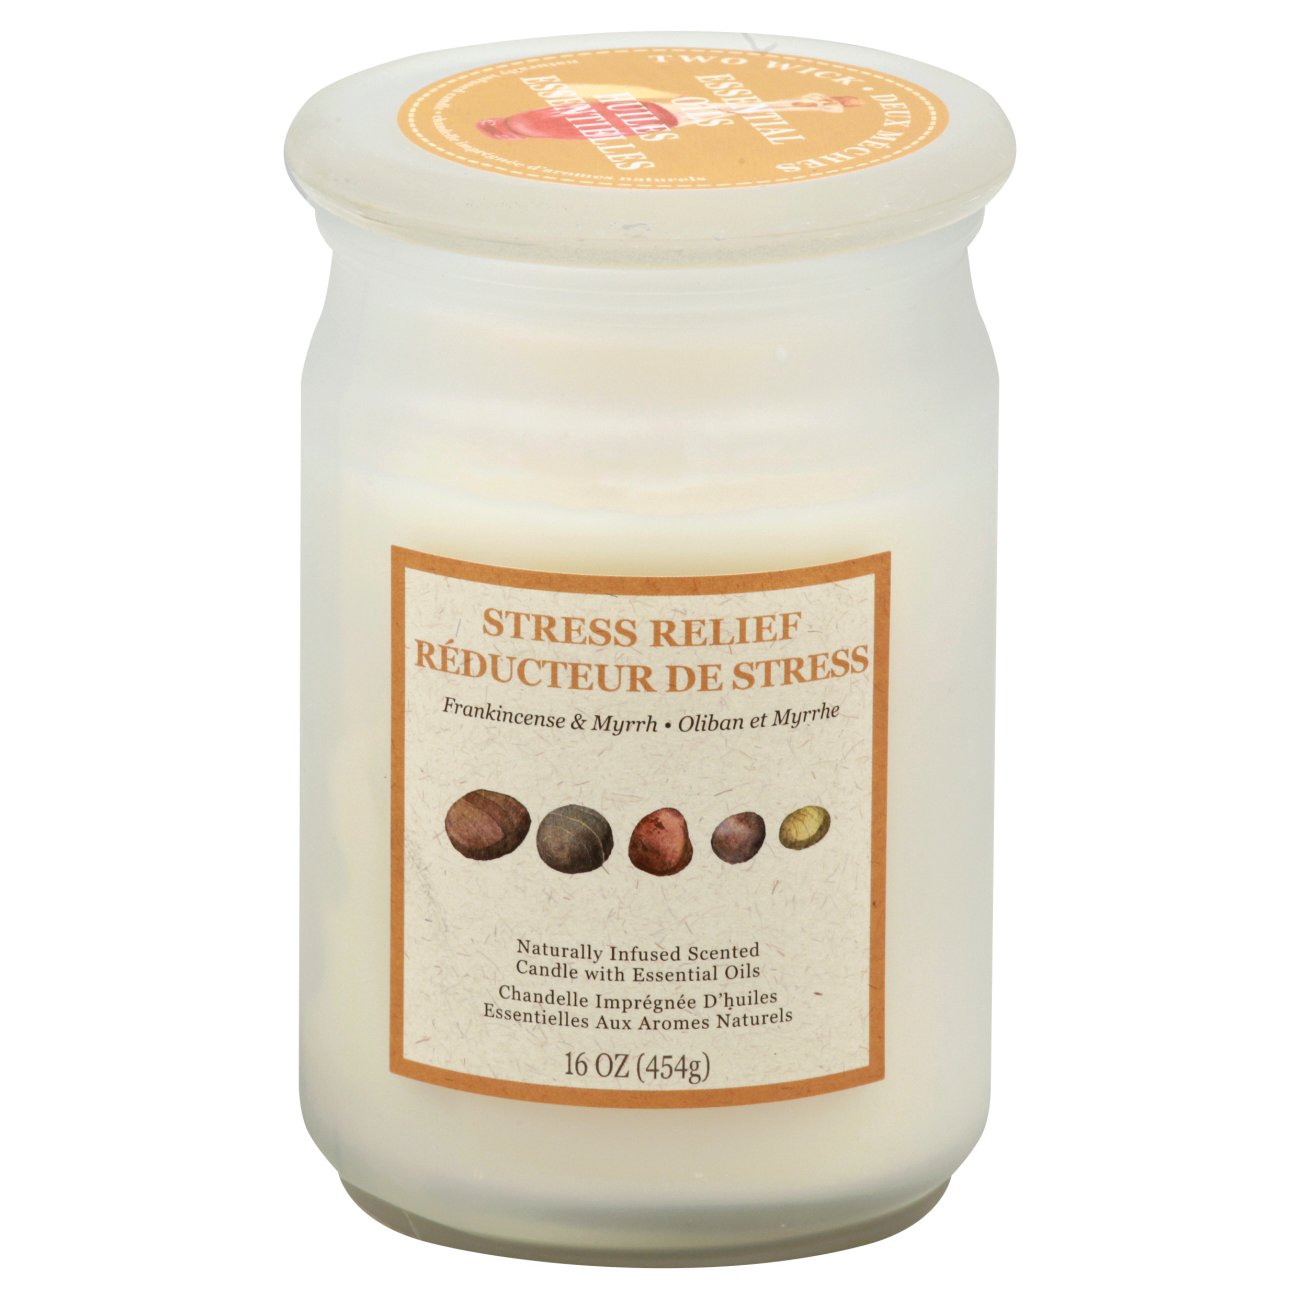 Star Candle Frankincense & Myrrh Scented Stress Relief Candle